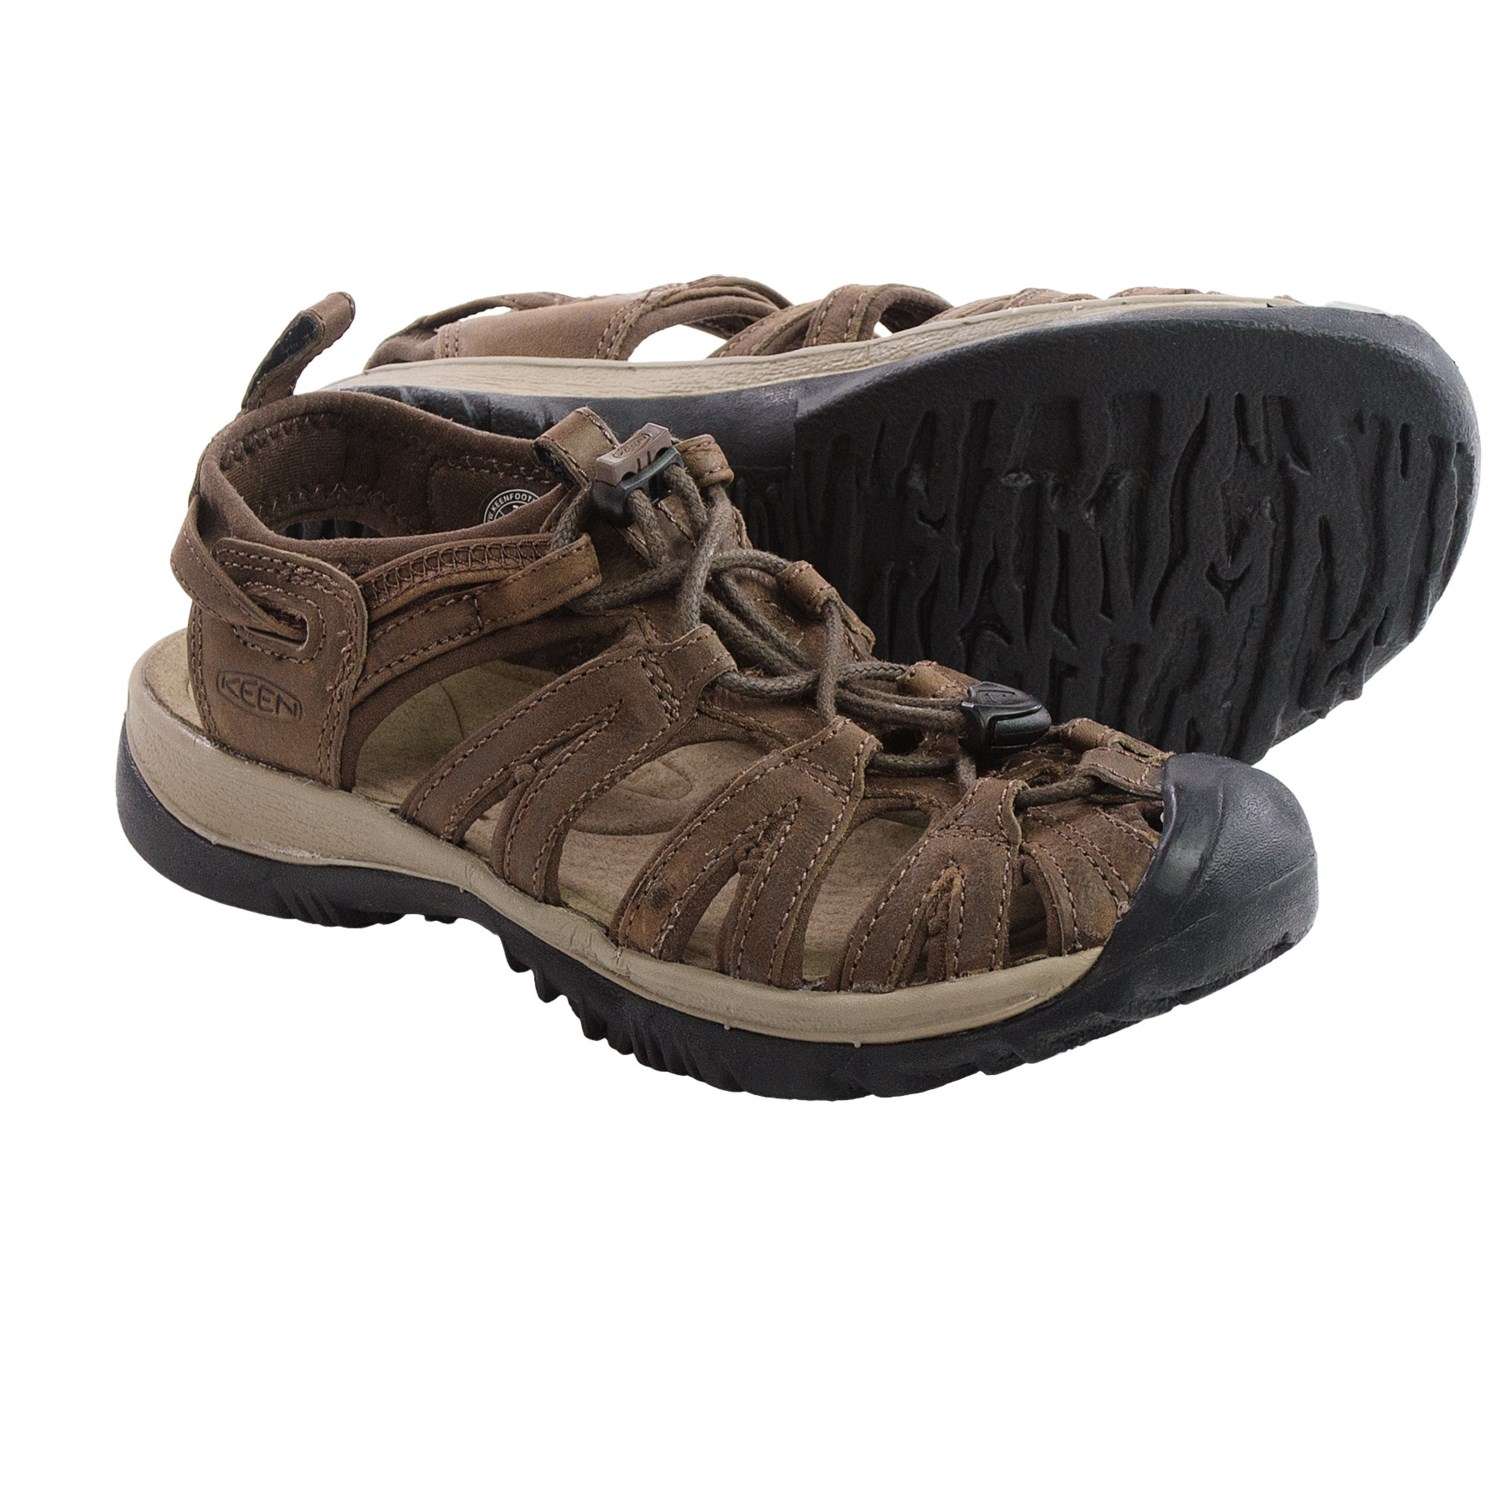 Keen Whisper Leather Sport Sandals (For Women) 9812P - Save 50%